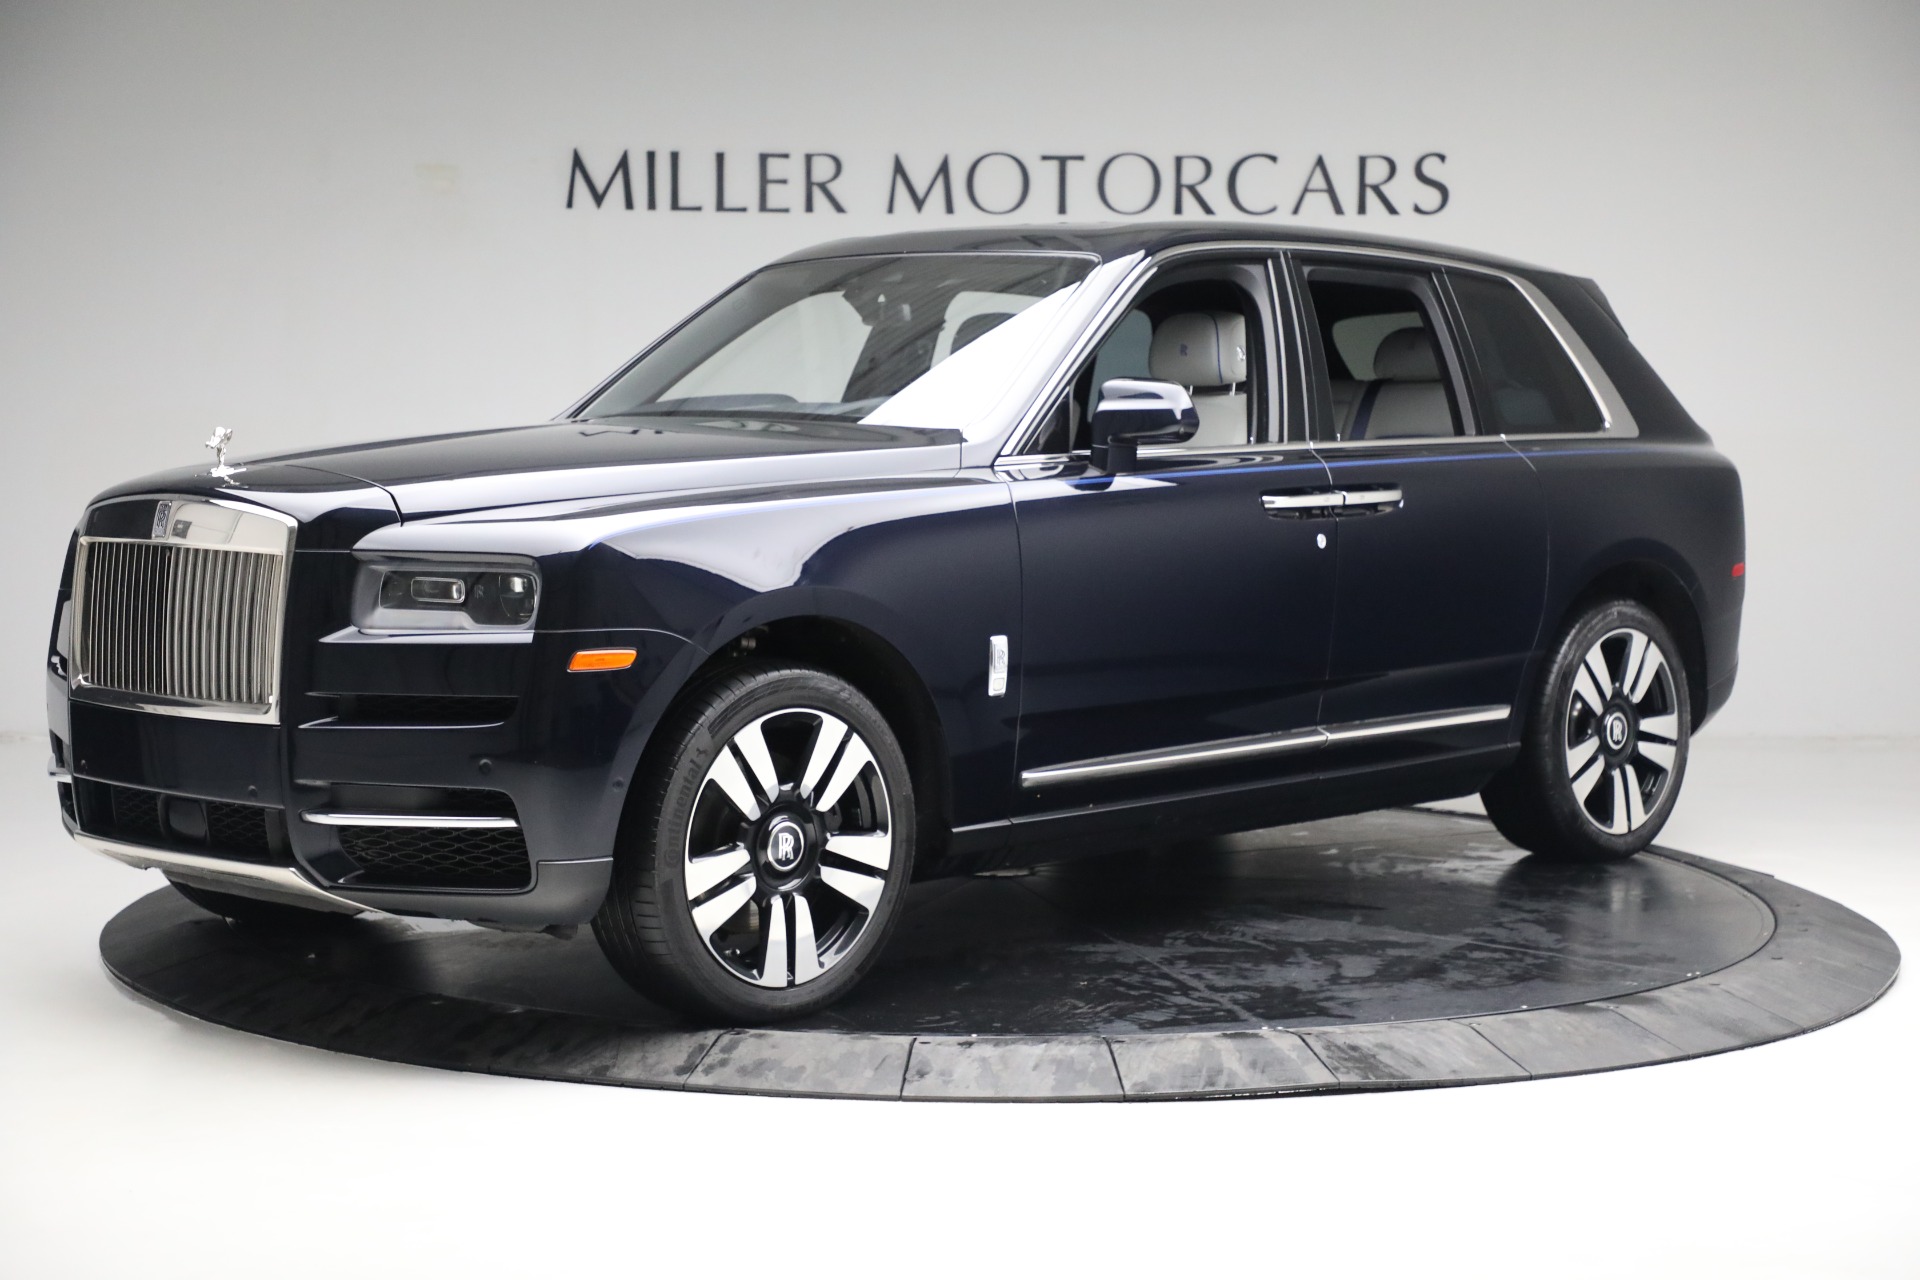 Used 2019 RollsRoyce Cullinan SUV MSRP 410K LAUNCH EDITION 53K OPTION  3700 MILES For Sale Special Pricing  Chicago Motor Cars Stock 16401A